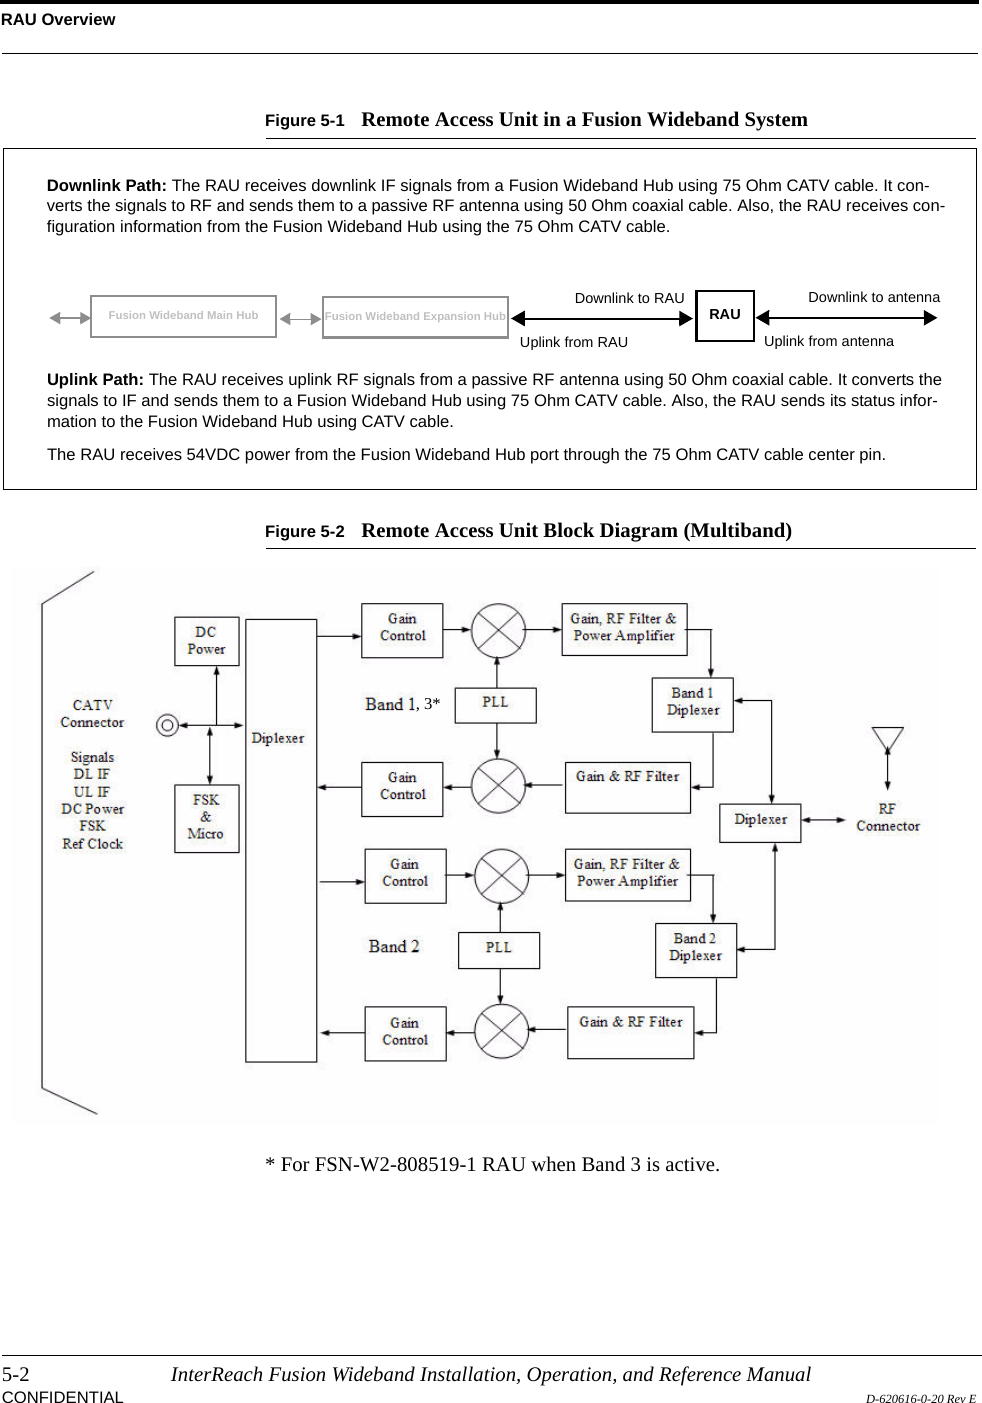 RAU Overview5-2 InterReach Fusion Wideband Installation, Operation, and Reference ManualCONFIDENTIAL D-620616-0-20 Rev EFigure 5-1 Remote Access Unit in a Fusion Wideband SystemFigure 5-2 Remote Access Unit Block Diagram (Multiband)* For FSN-W2-808519-1 RAU when Band 3 is active.Fusion Wideband Expansion Hub RAUDownlink Path: The RAU receives downlink IF signals from a Fusion Wideband Hub using 75 Ohm CATV cable. It con-verts the signals to RF and sends them to a passive RF antenna using 50 Ohm coaxial cable. Also, the RAU receives con-figuration information from the Fusion Wideband Hub using the 75 Ohm CATV cable.Uplink Path: The RAU receives uplink RF signals from a passive RF antenna using 50 Ohm coaxial cable. It converts the signals to IF and sends them to a Fusion Wideband Hub using 75 Ohm CATV cable. Also, the RAU sends its status infor-mation to the Fusion Wideband Hub using CATV cable.The RAU receives 54VDC power from the Fusion Wideband Hub port through the 75 Ohm CATV cable center pin.Downlink to RAUUplink from RAUFusion Wideband Main HubDownlink to antennaUplink from antenna, 3*